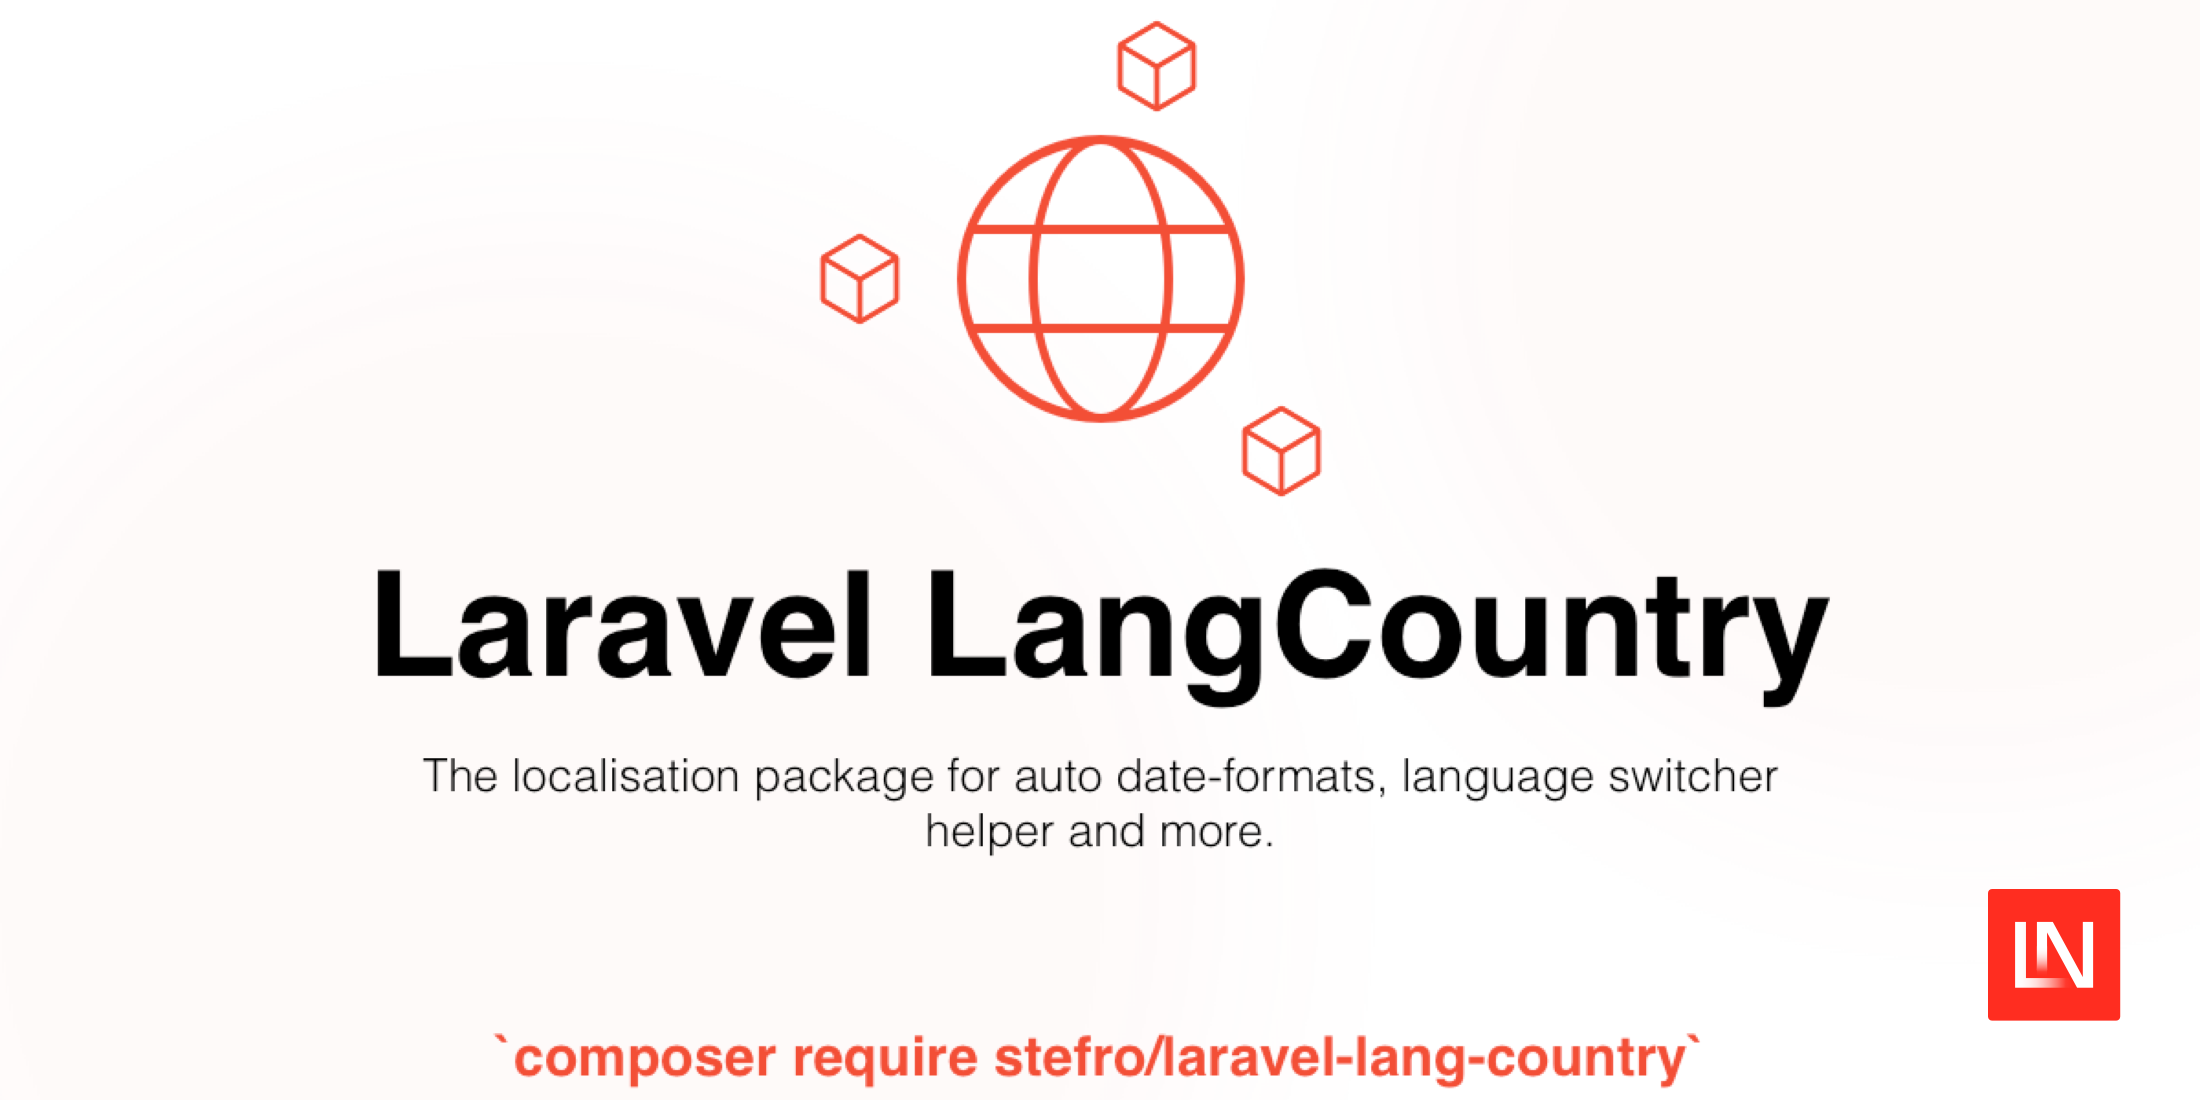 LangCountry is a Localization Package for Laravel